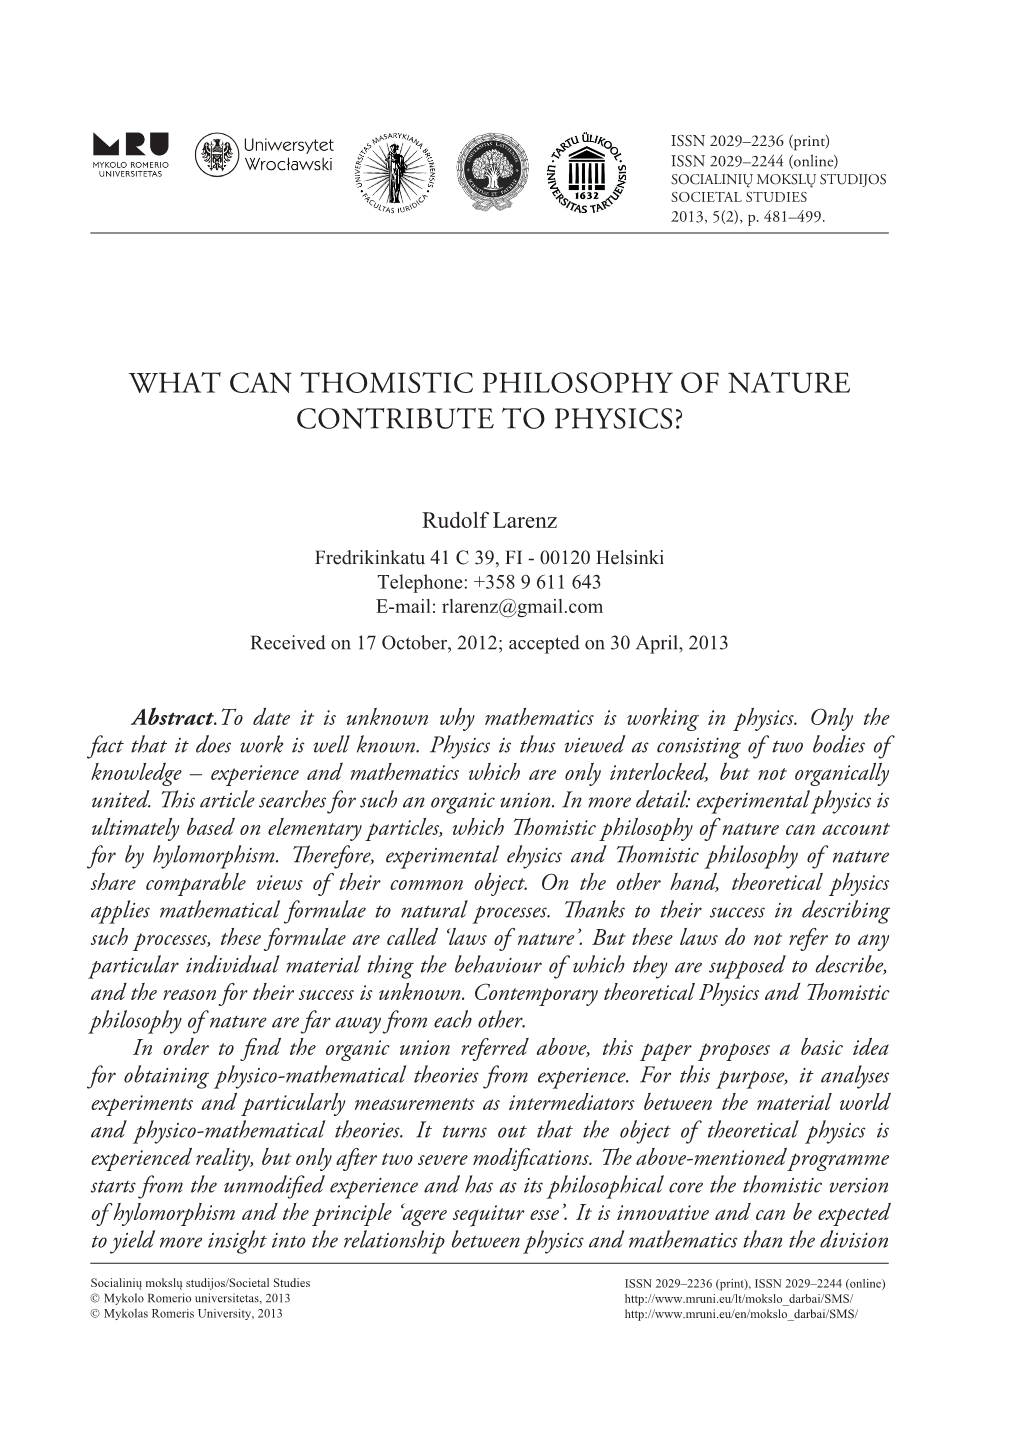 What Can Thomistic Philosophy of Nature Contribute to Physics?